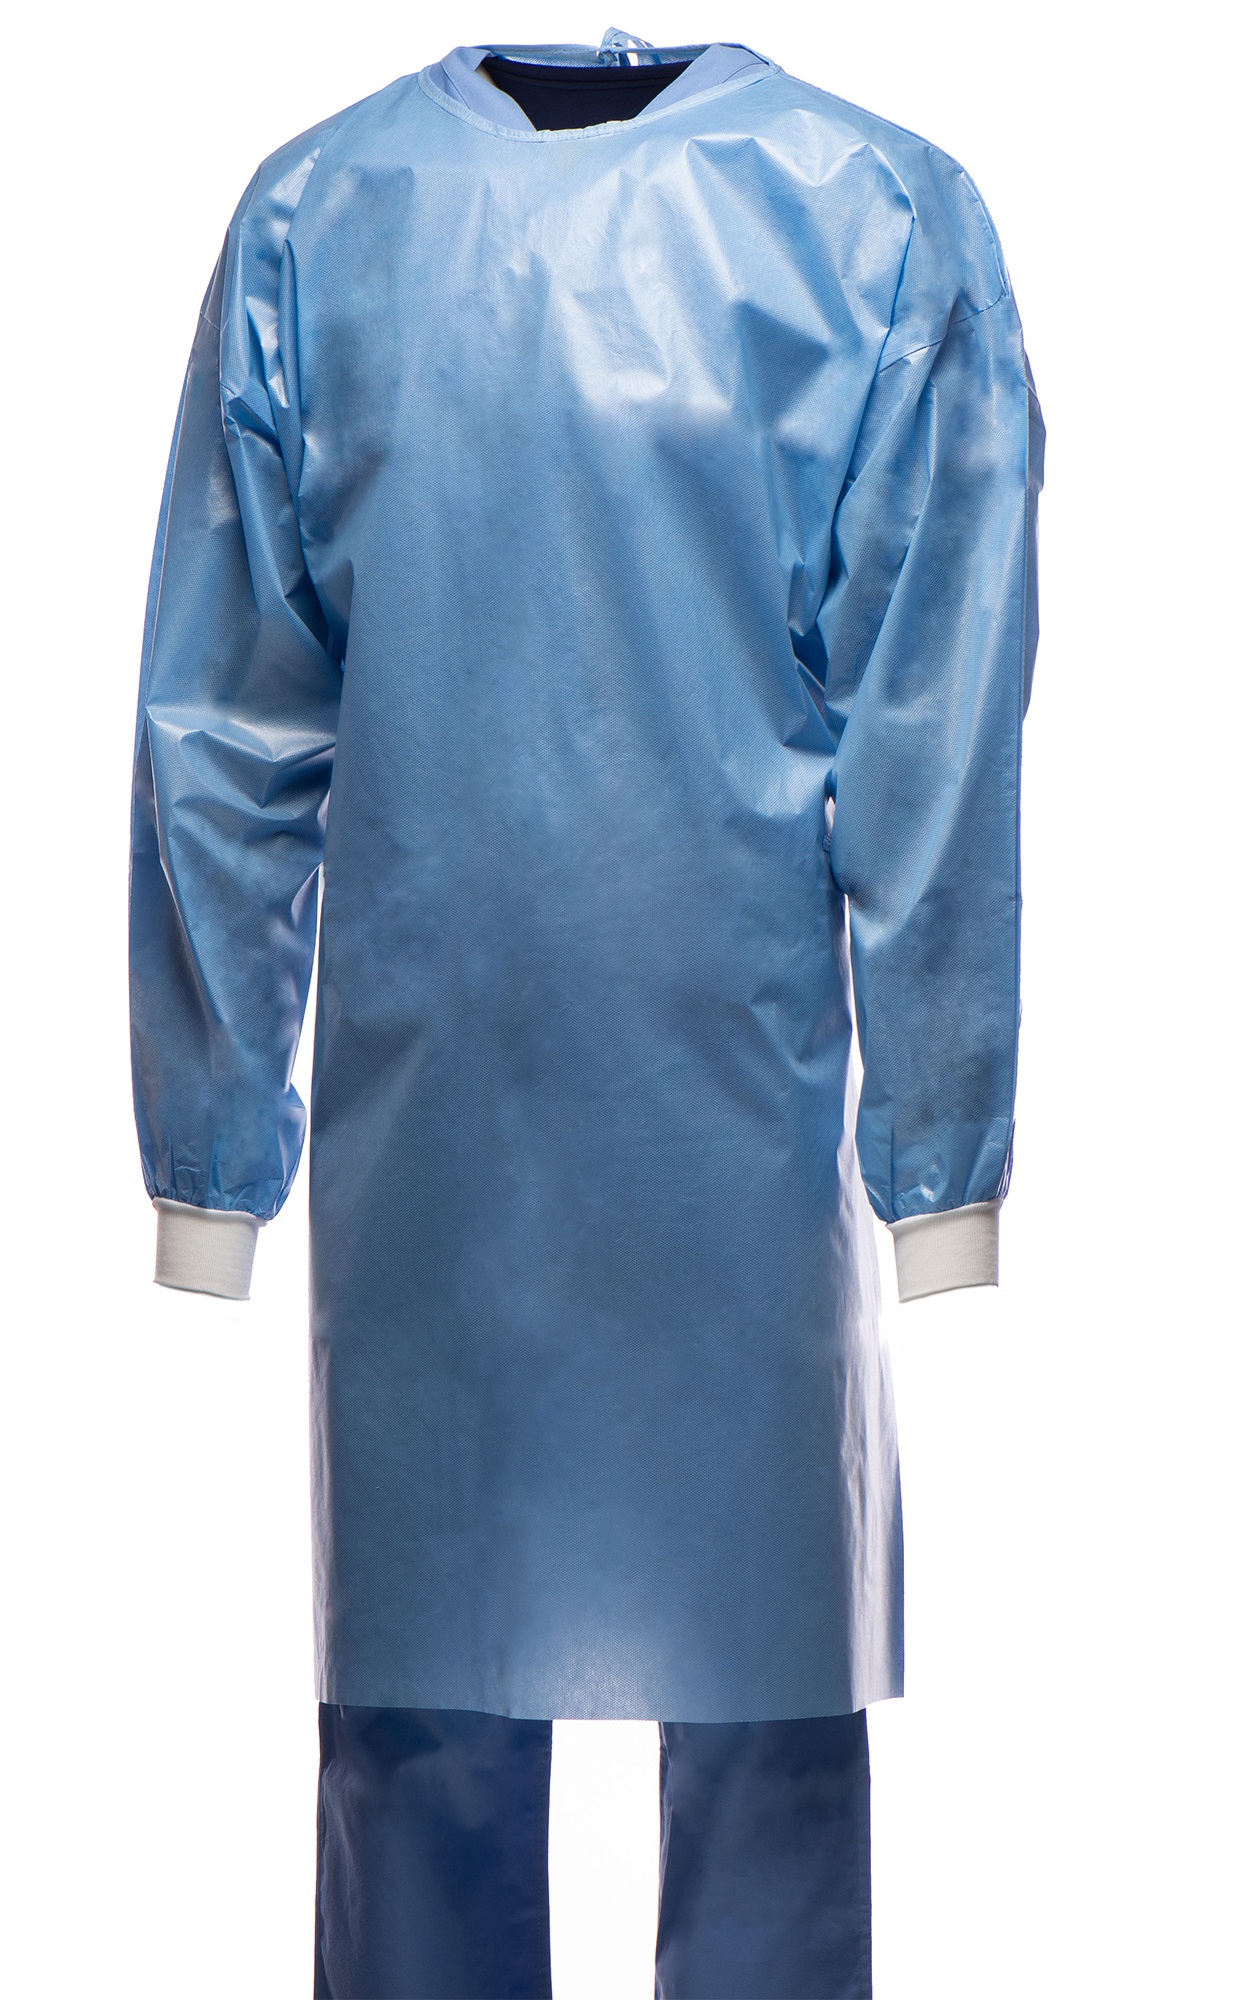 ComPel MLR Protective Surgical Gown  AAMI Level 3 Protection